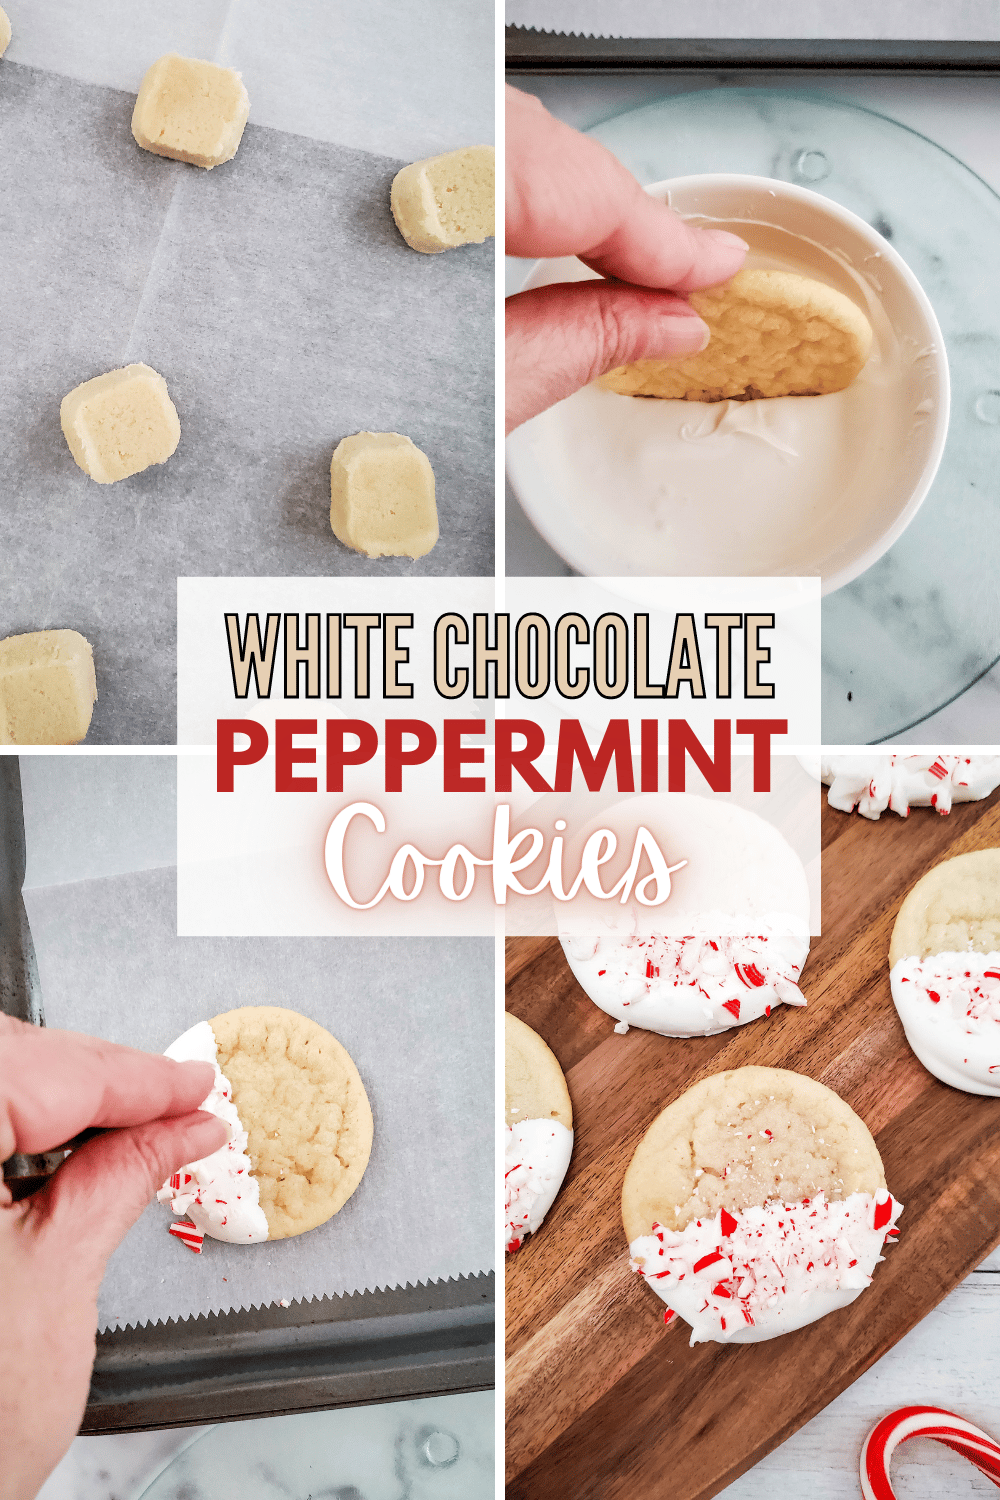 These White Chocolate Peppermint Cookies are perfect for the holidays! They're dipped in white chocolate and coated in crushed peppermints. #whitechocolatepeppermintcookies #christmascookies #peppermintcookies #whitechocolatecookies via @wondermomwannab